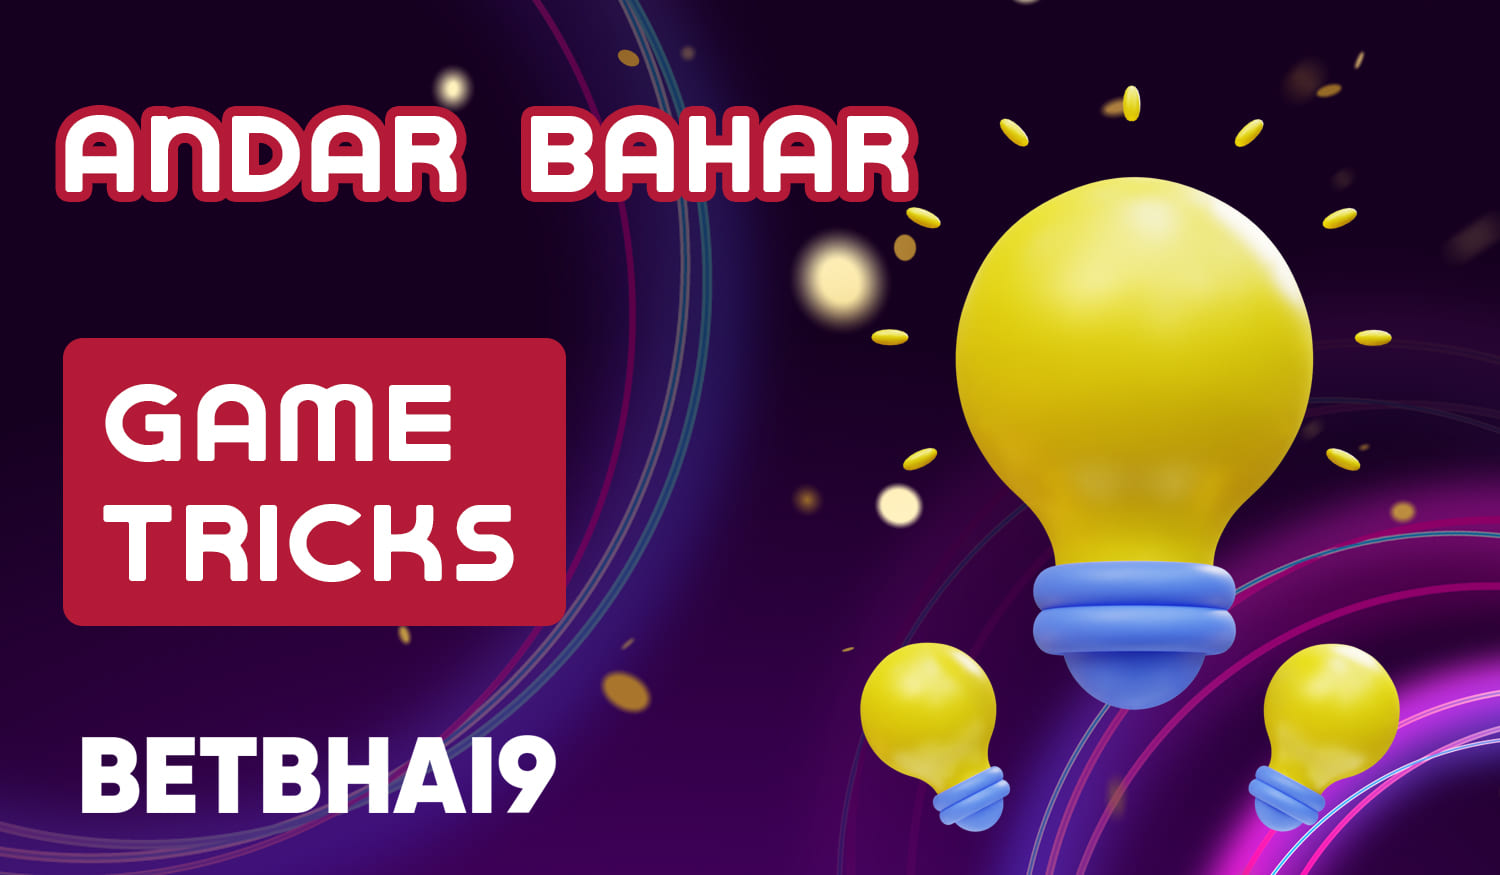 Some useful tips for a successful game of Andar Bahar at Betbhai9 casino online